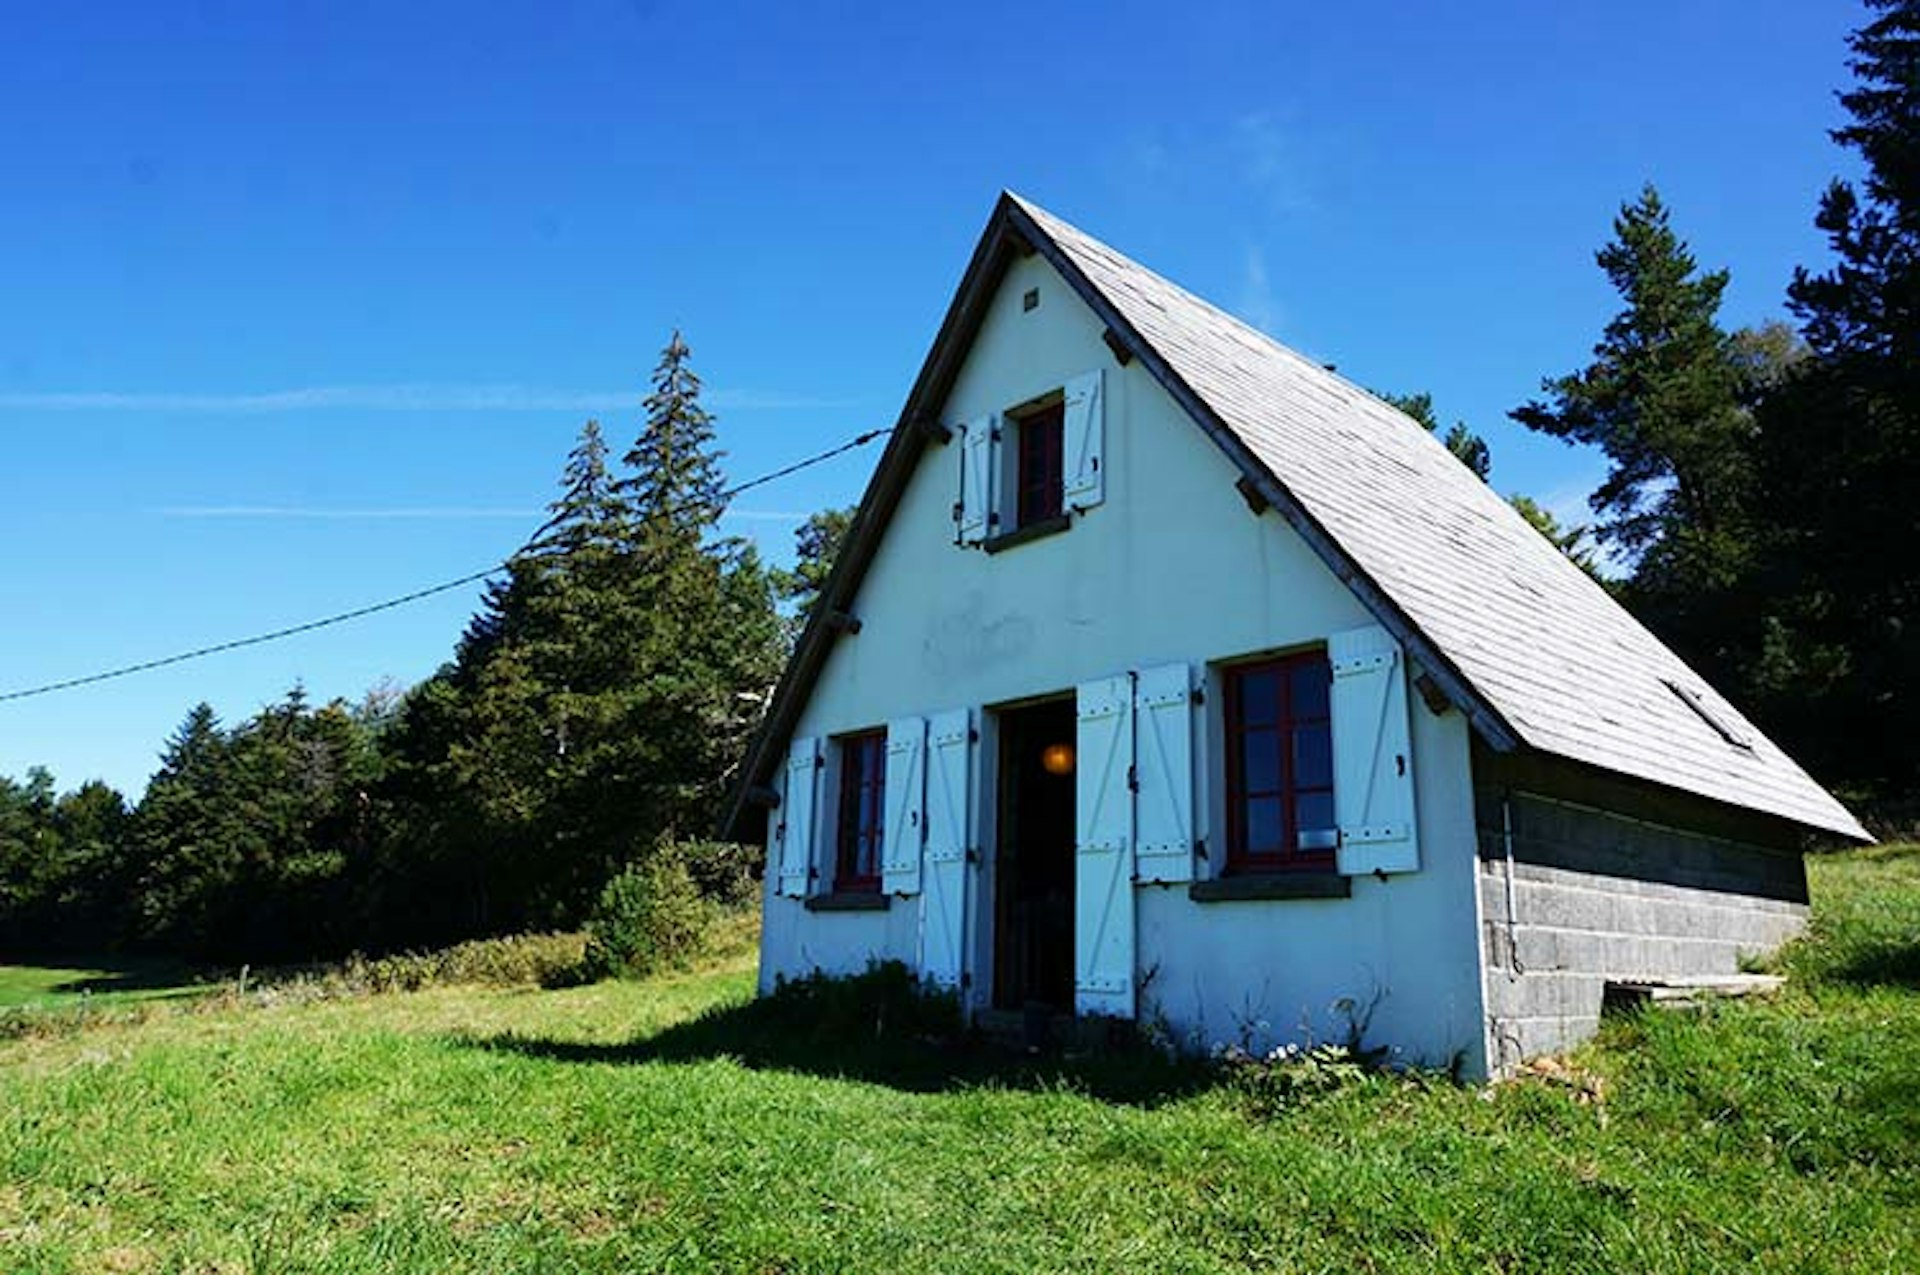 Christophe's lodge nestled in the Auvergne meadows. Image by Anita Isalska / Lonely Planet